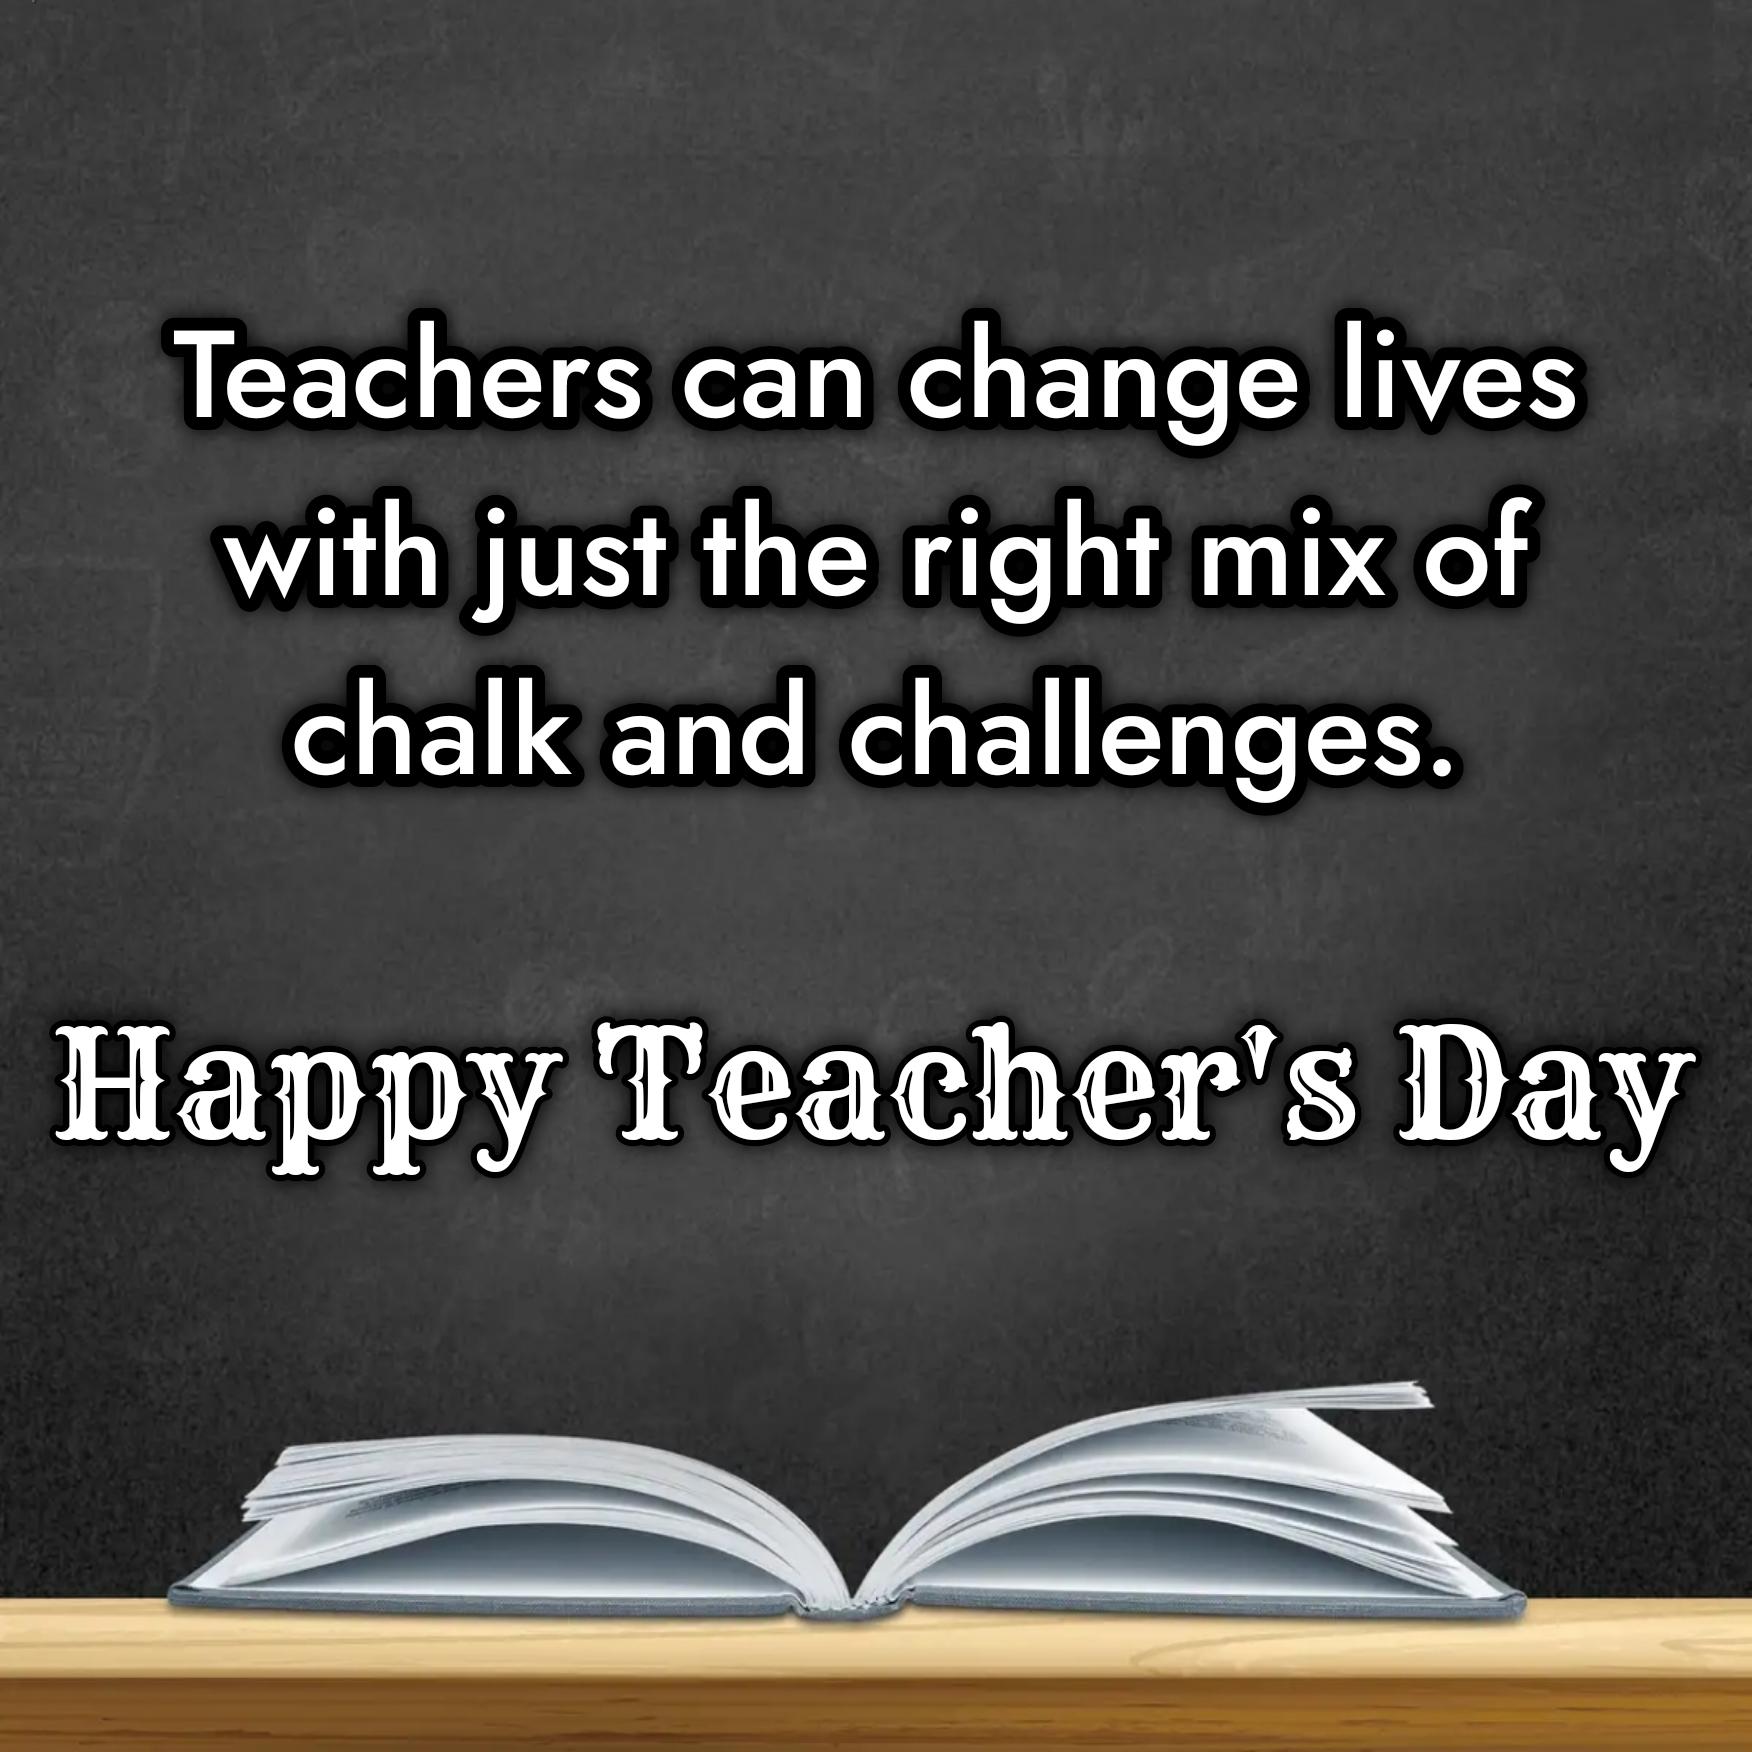 Teachers can change lives with just the right mix of chalk